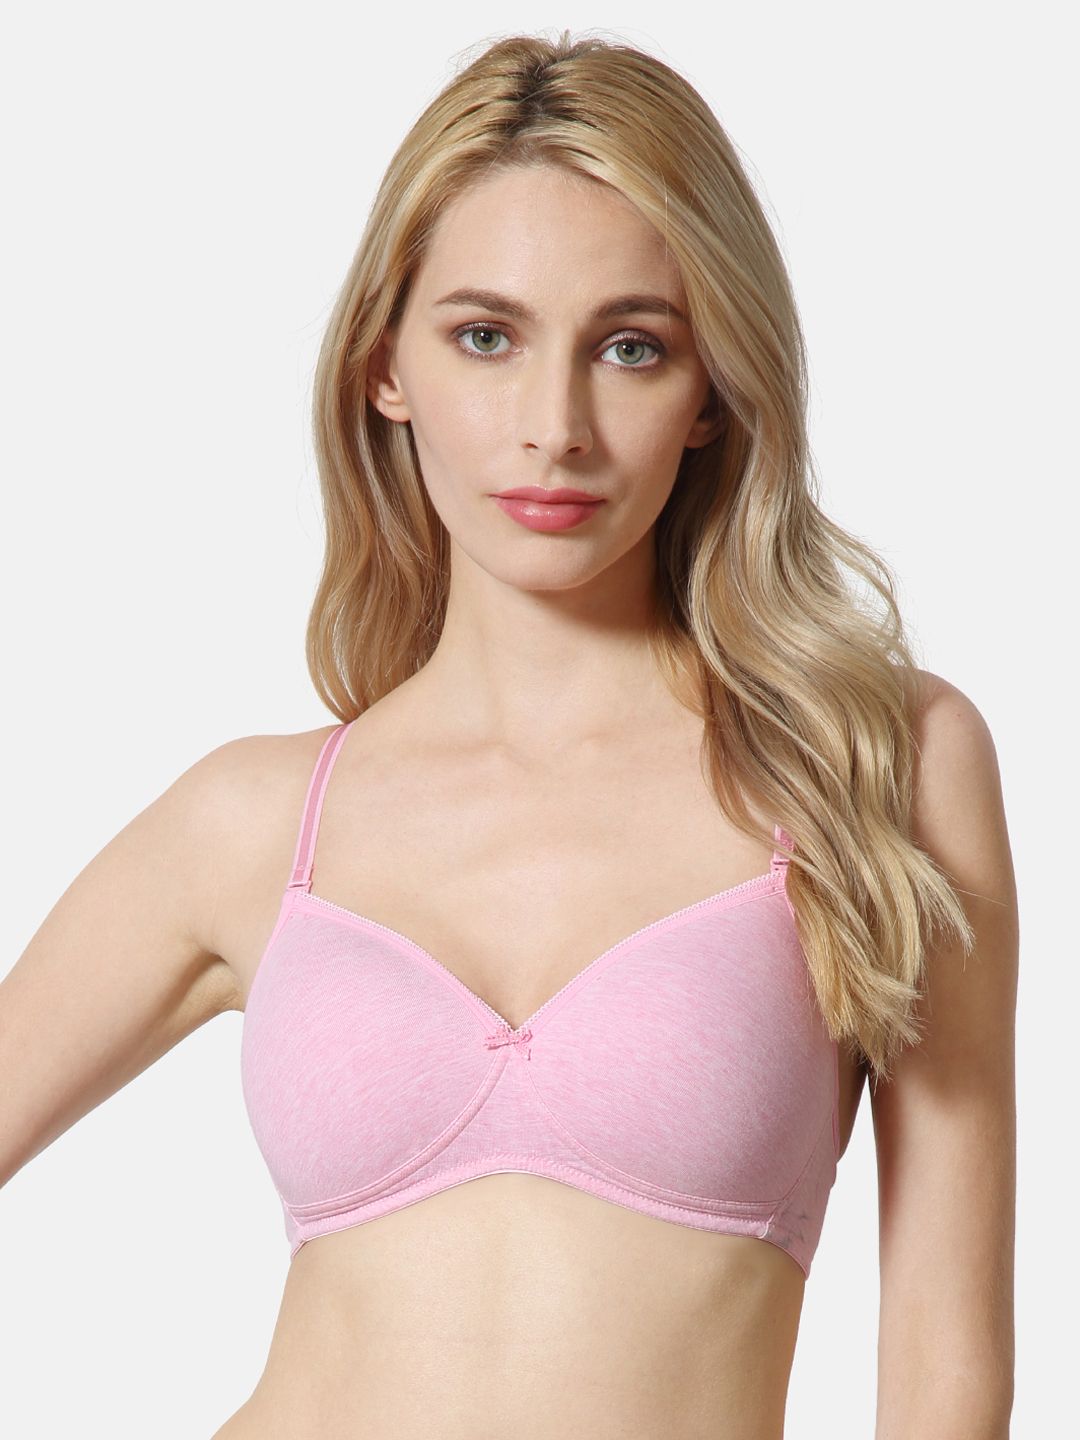 Van Heusen Pink Solid Non-Wired Lightly Padded Everyday Bra ILIBR1CSSWW3111002 Price in India